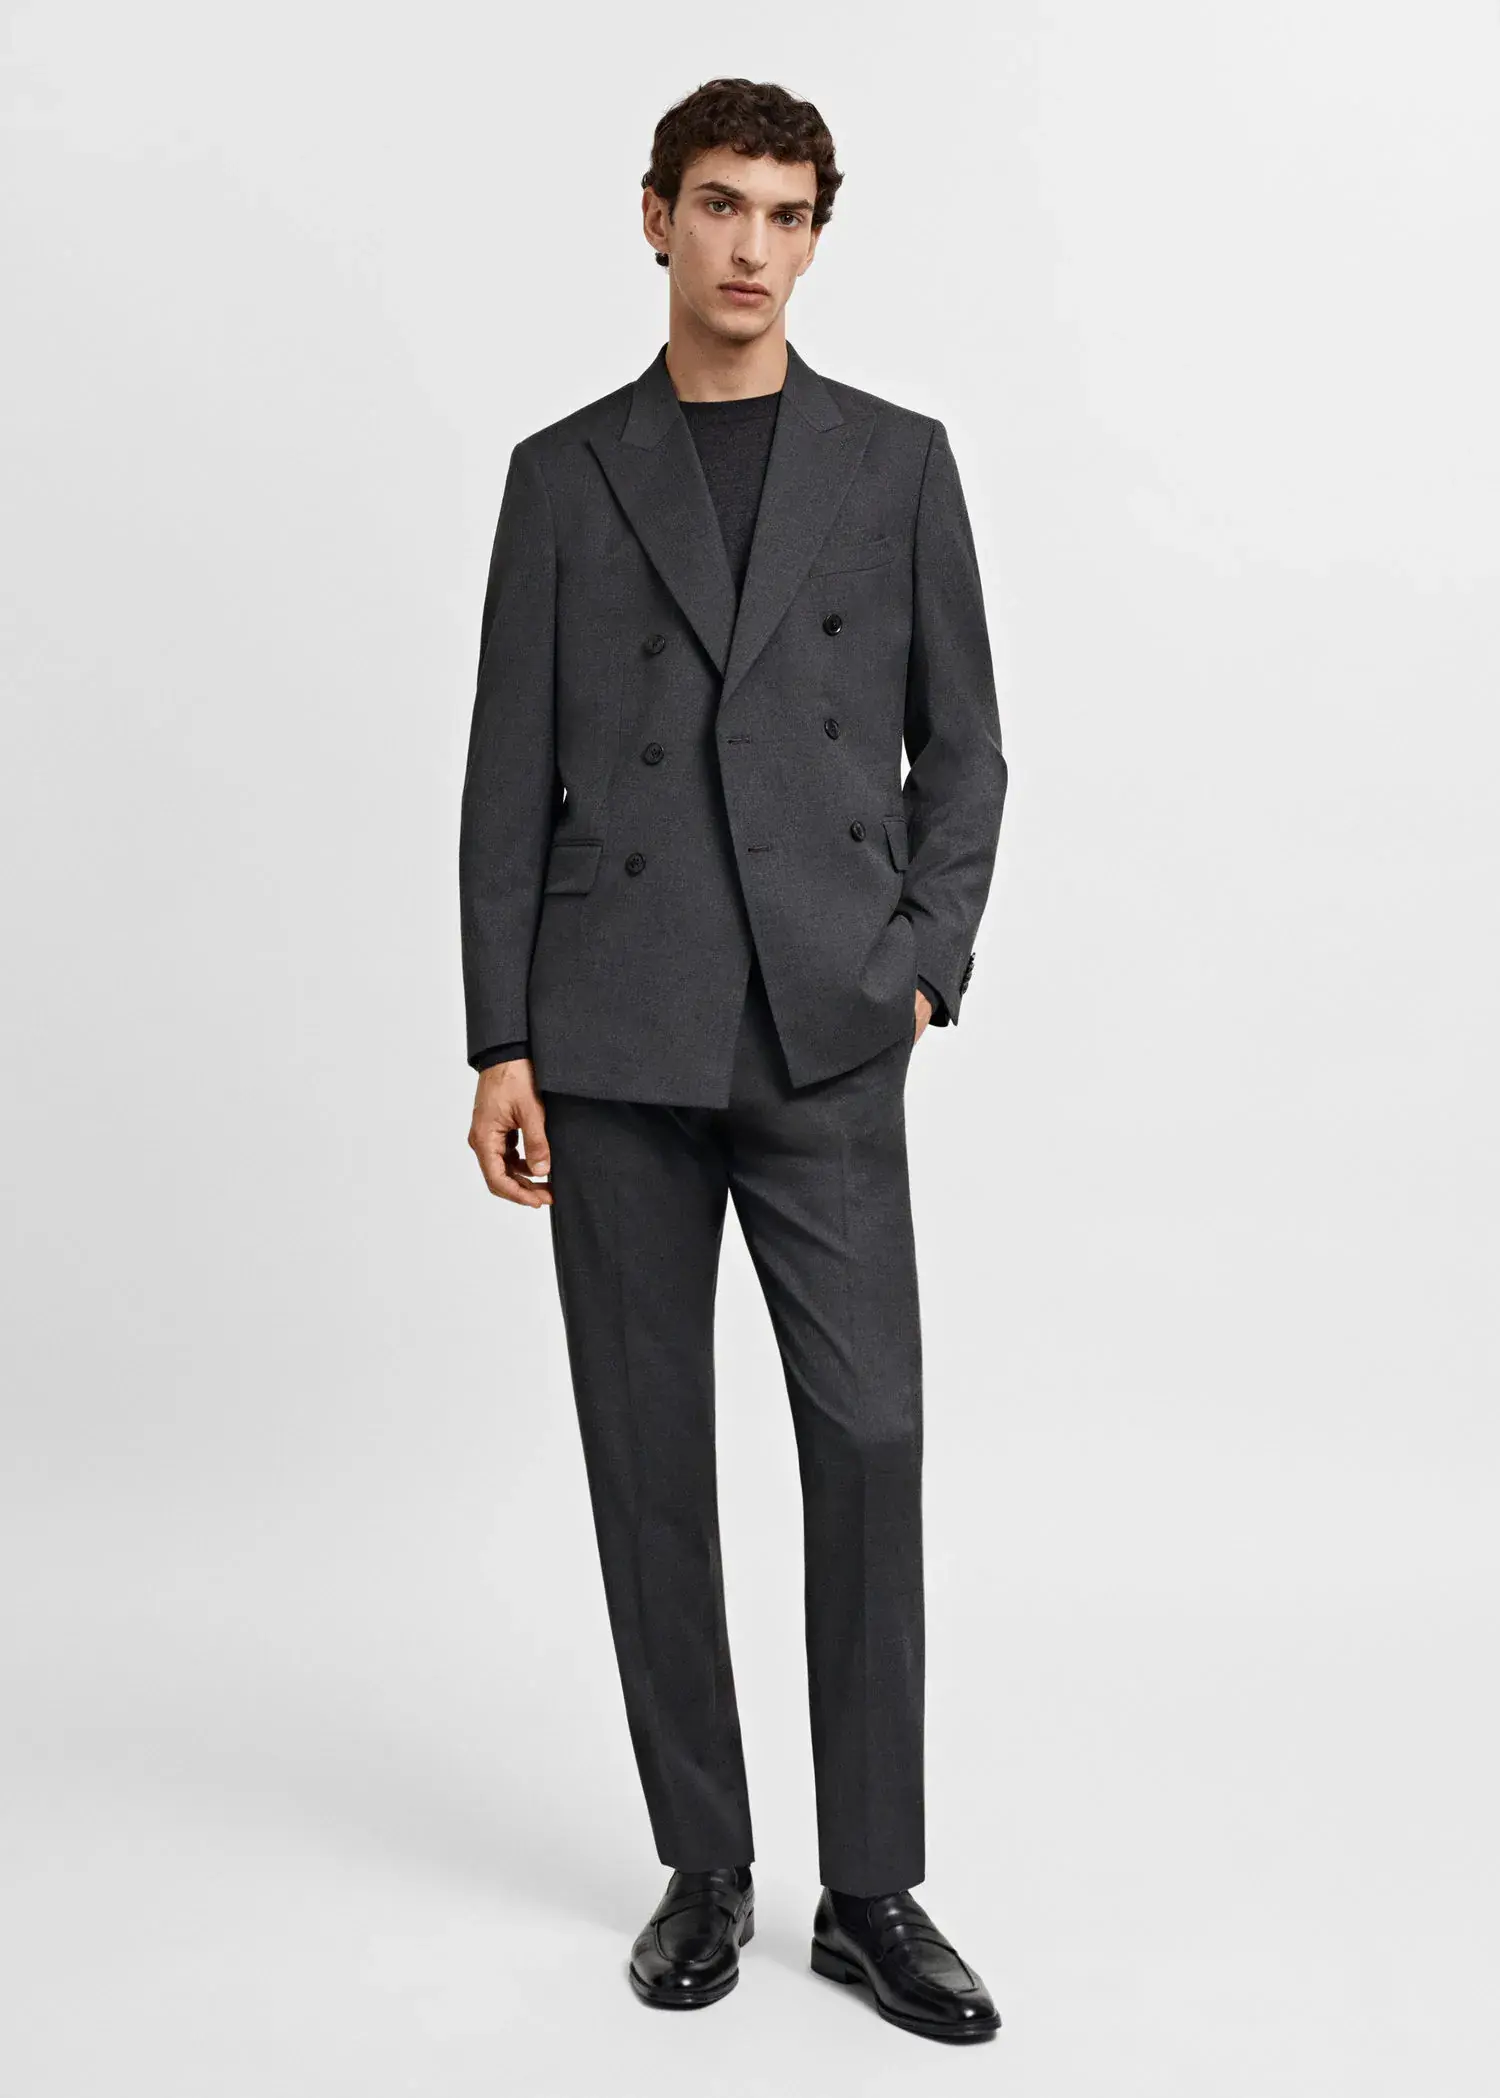 Mango Slim fit double-breasted suit blazer. 3